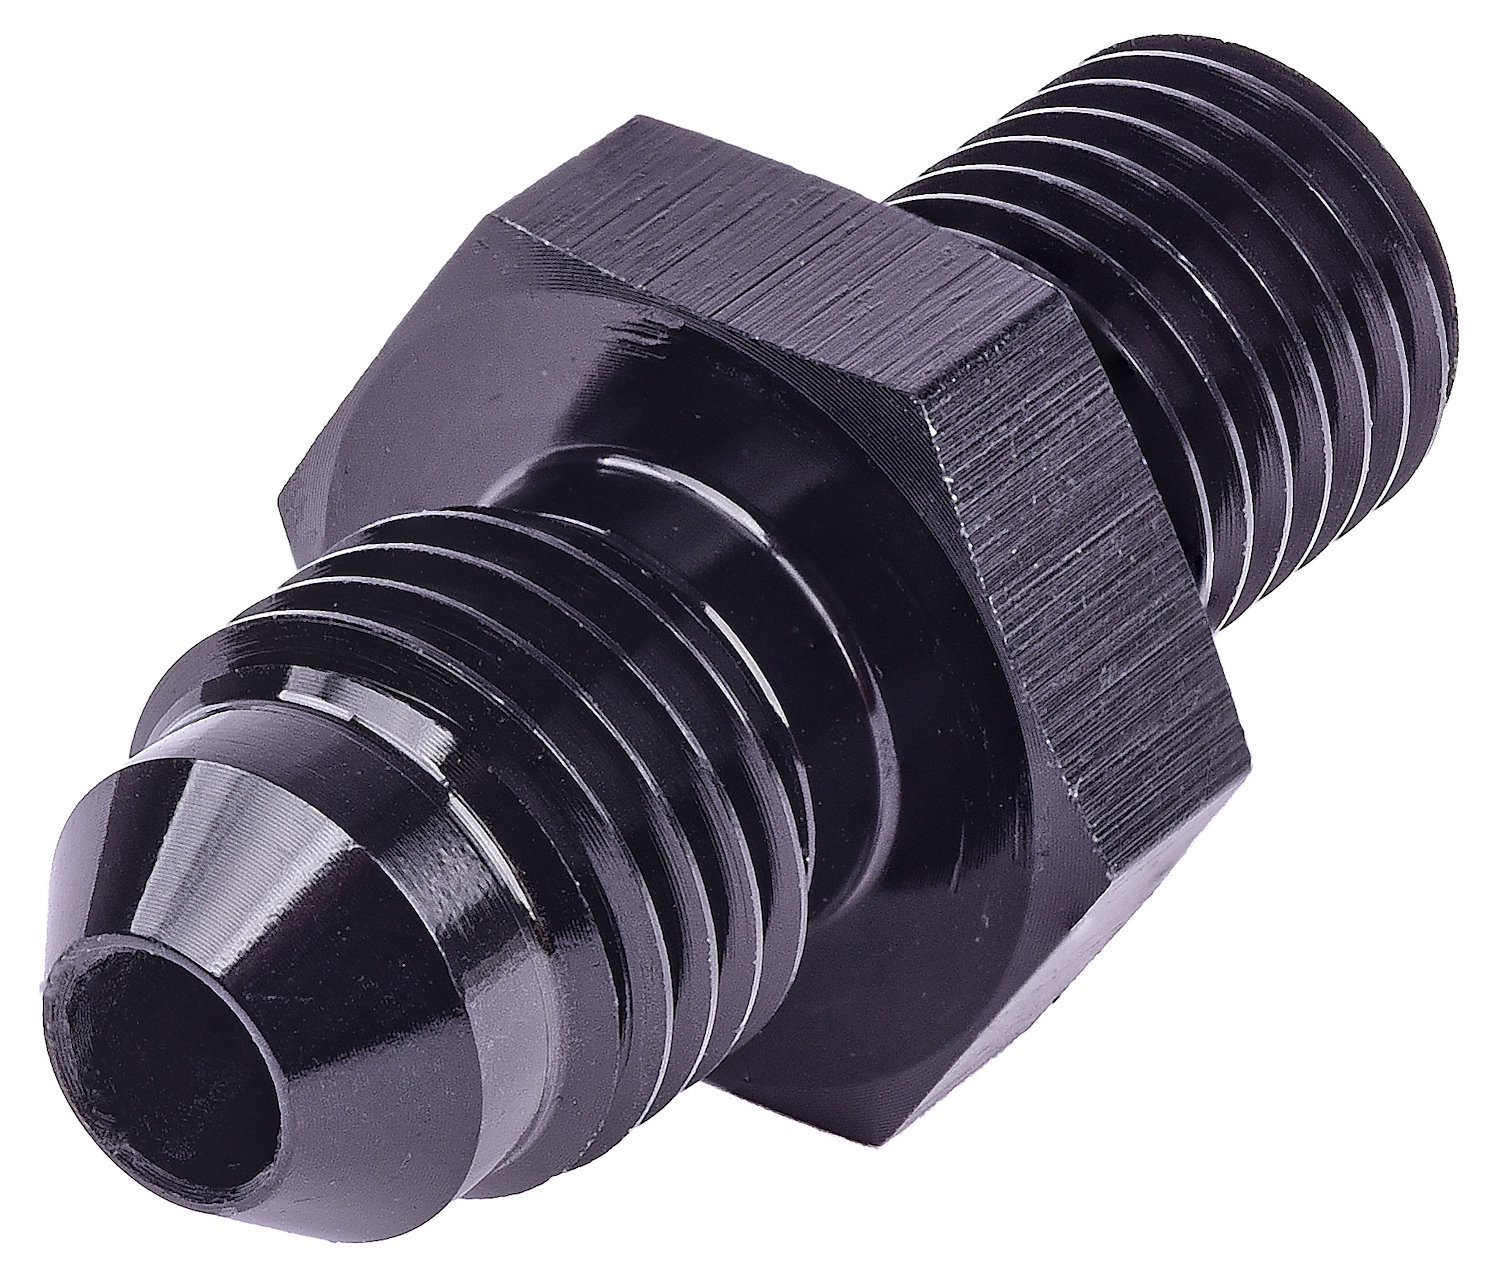 AN to Metric Adapter Fitting [-4 AN Male to 10mm x 1.25 Male, Black]